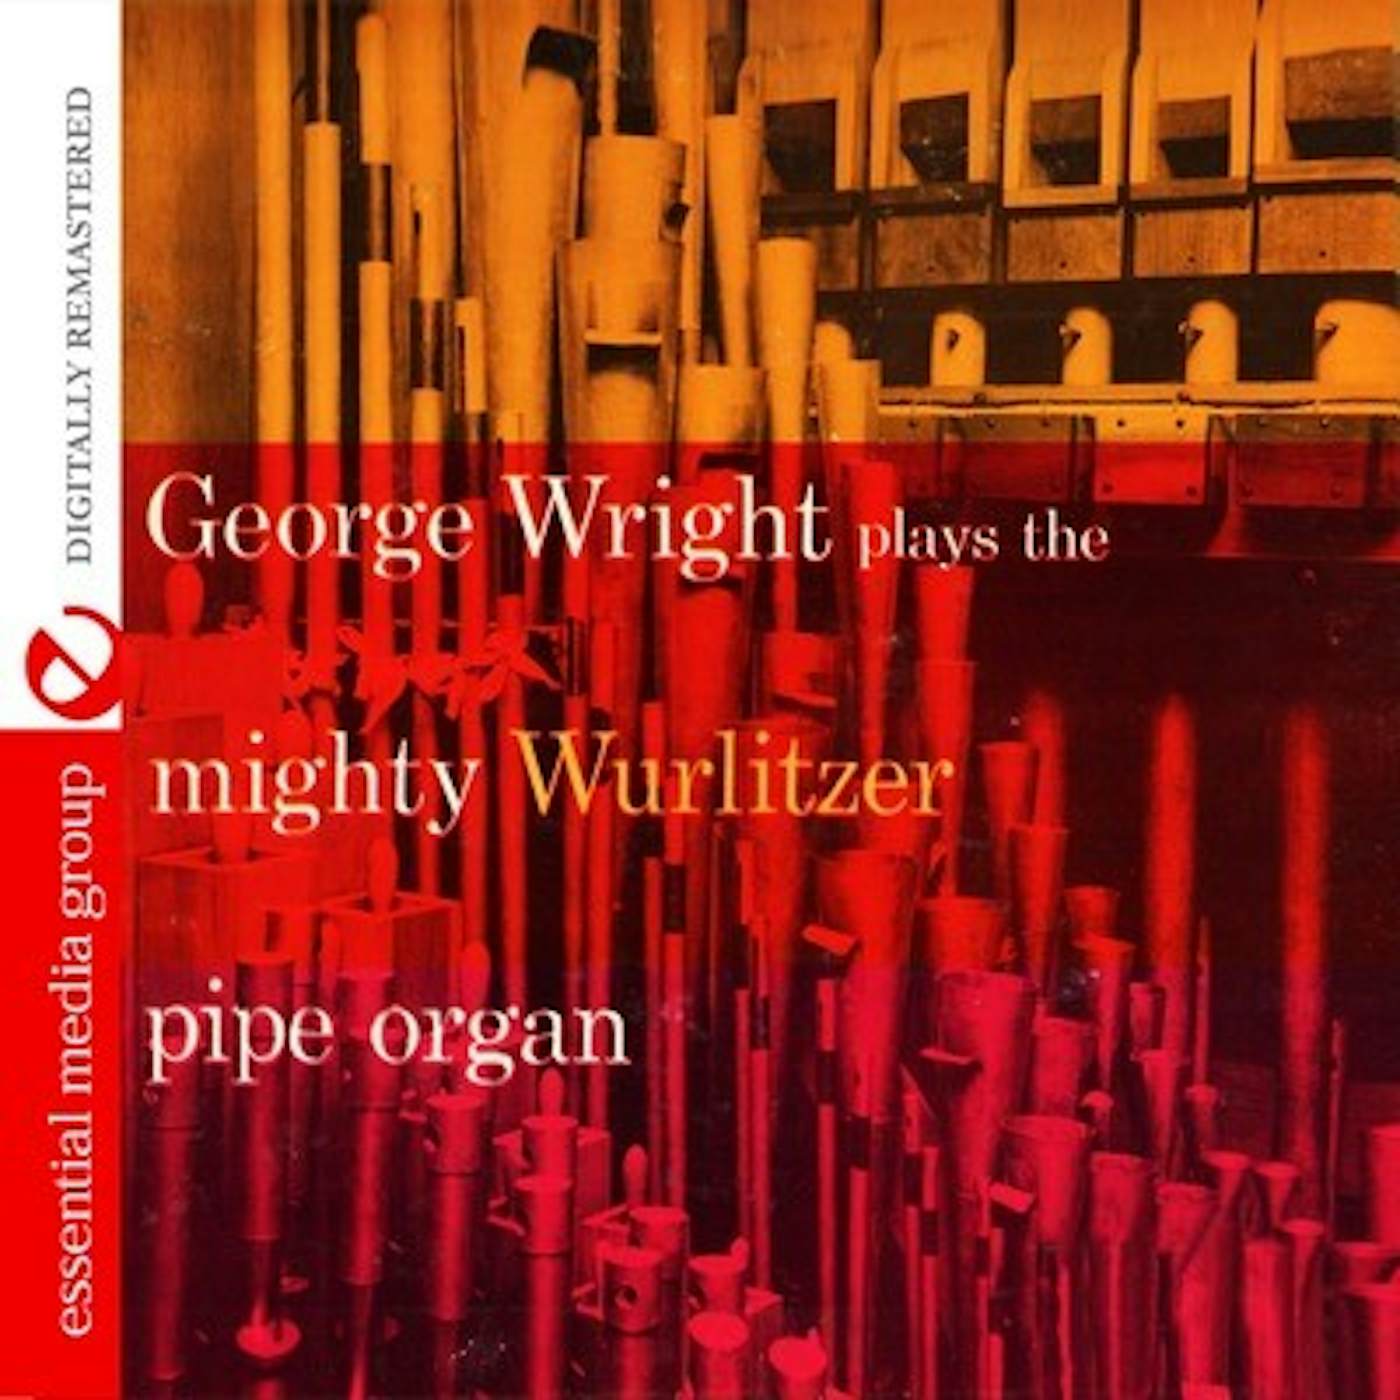 George Wright PLAYS THE MIGHTY WURLITZER PIPE ORGAN CD